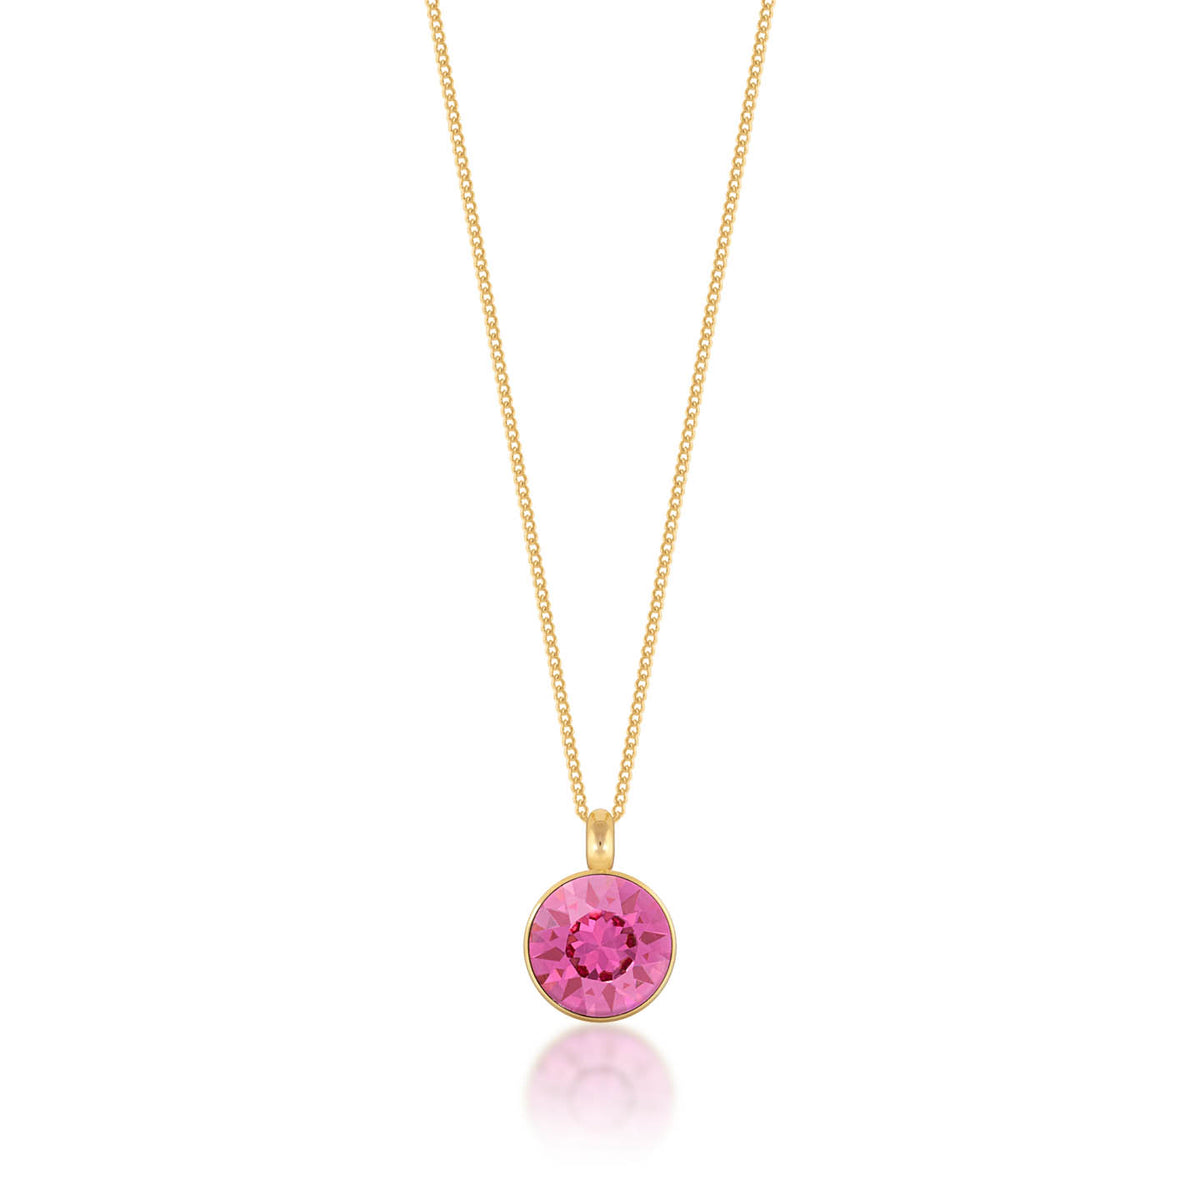 Bella Pendant Necklace with Pink Rose Round Crystals from Swarovski Gold Plated - Ed Heart